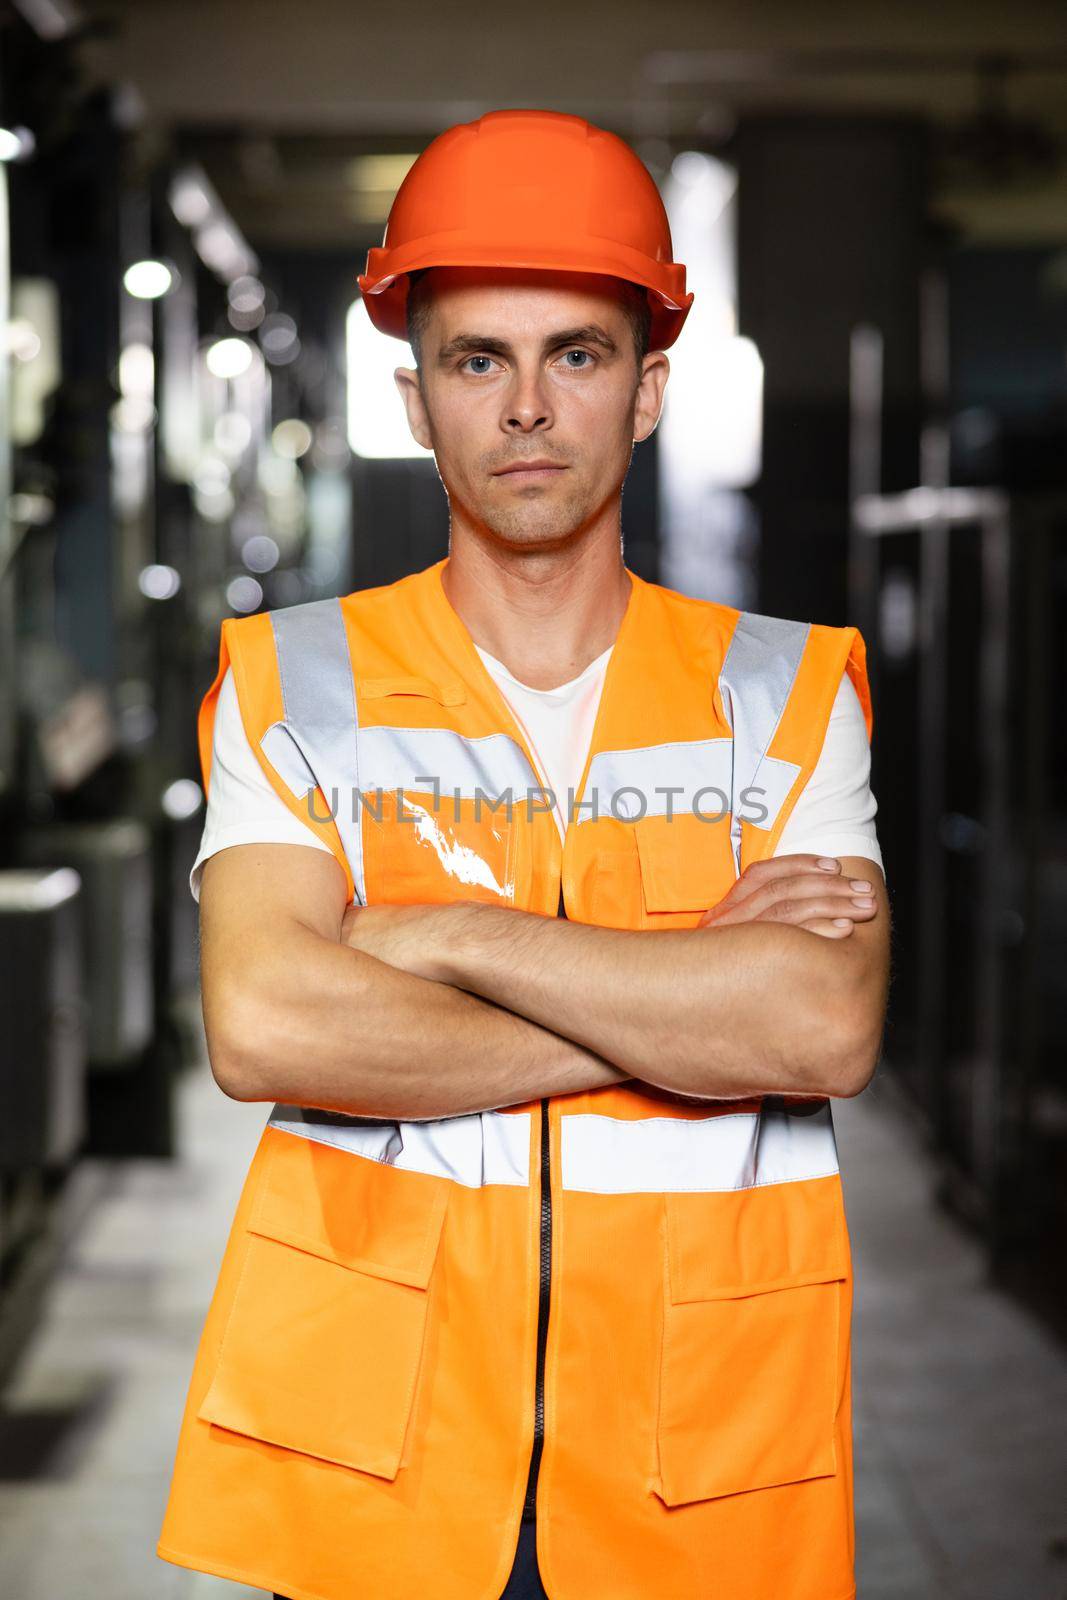 Power energy motor machinery cabinets in control or server room, operator station network in industry factory. Portrait of an engineer man or worker crossing arms, working in electrical room station by uflypro